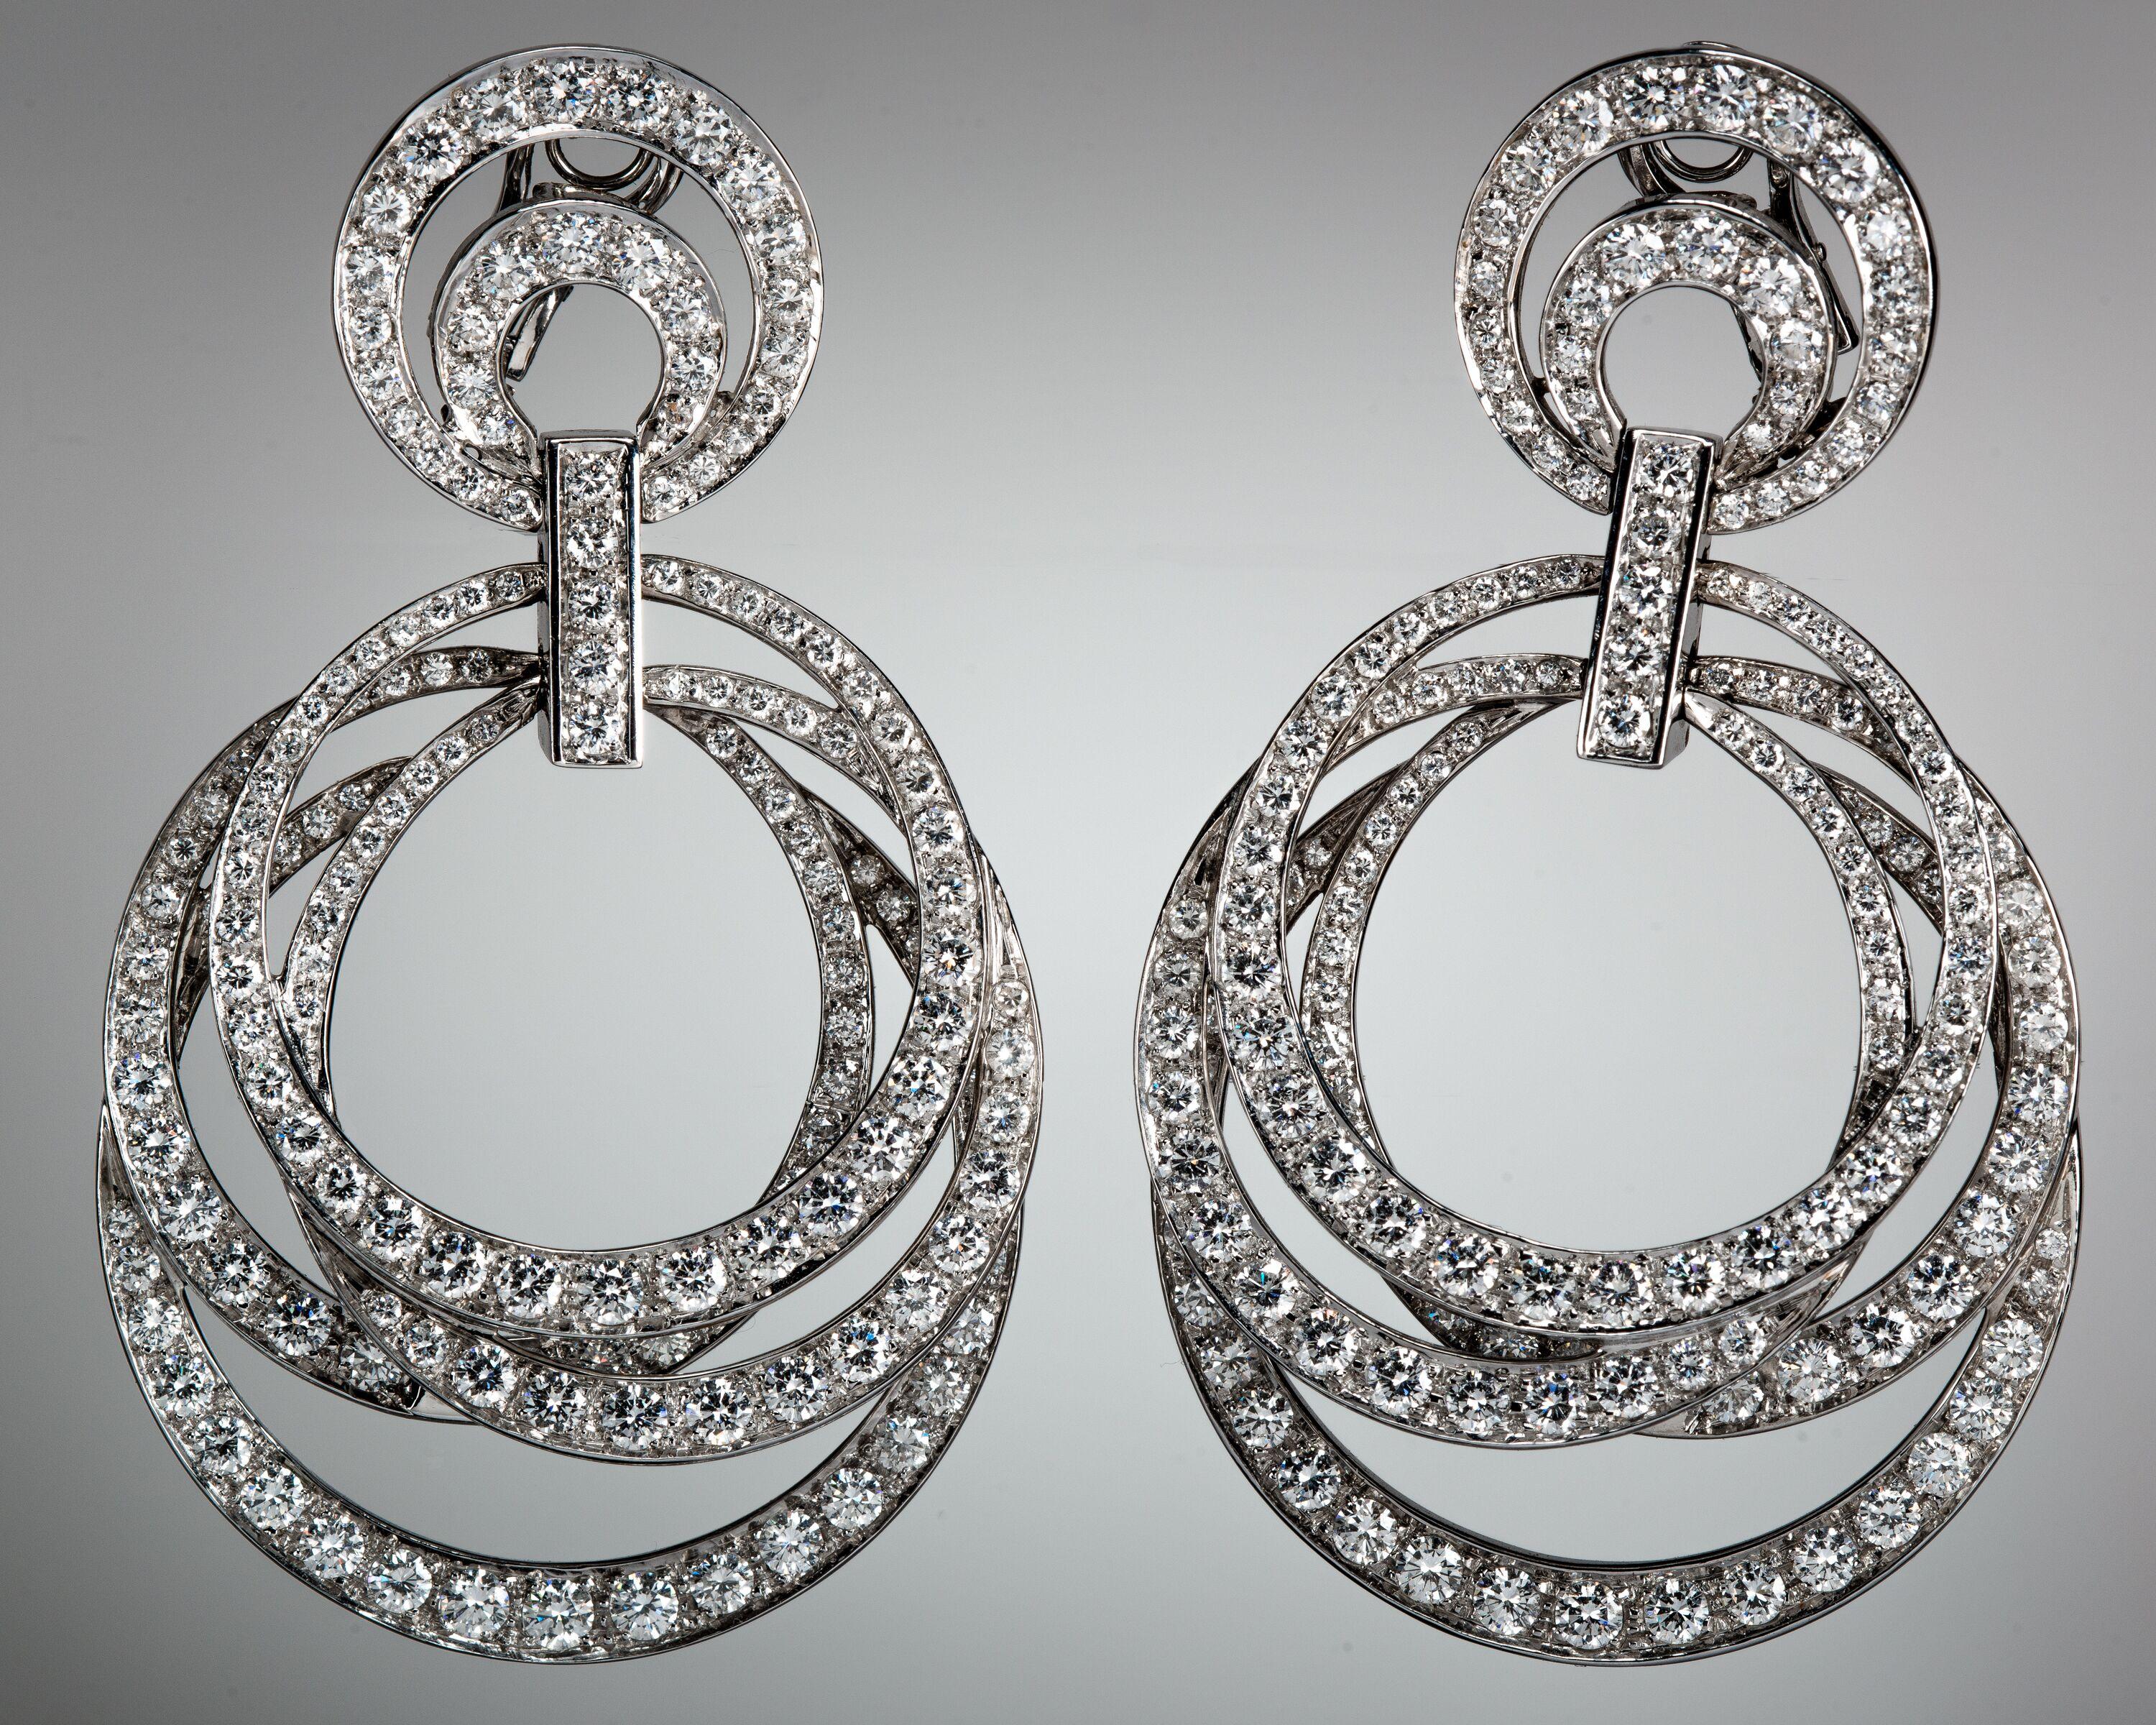 In keeping with the Moussaieff tradition of secrecy and scarcity, these interlocking hoop ear pendants are among the only Moussaieff pieces currently available on the market outside of the House’s own few boutiques. The universally-loved hoop design